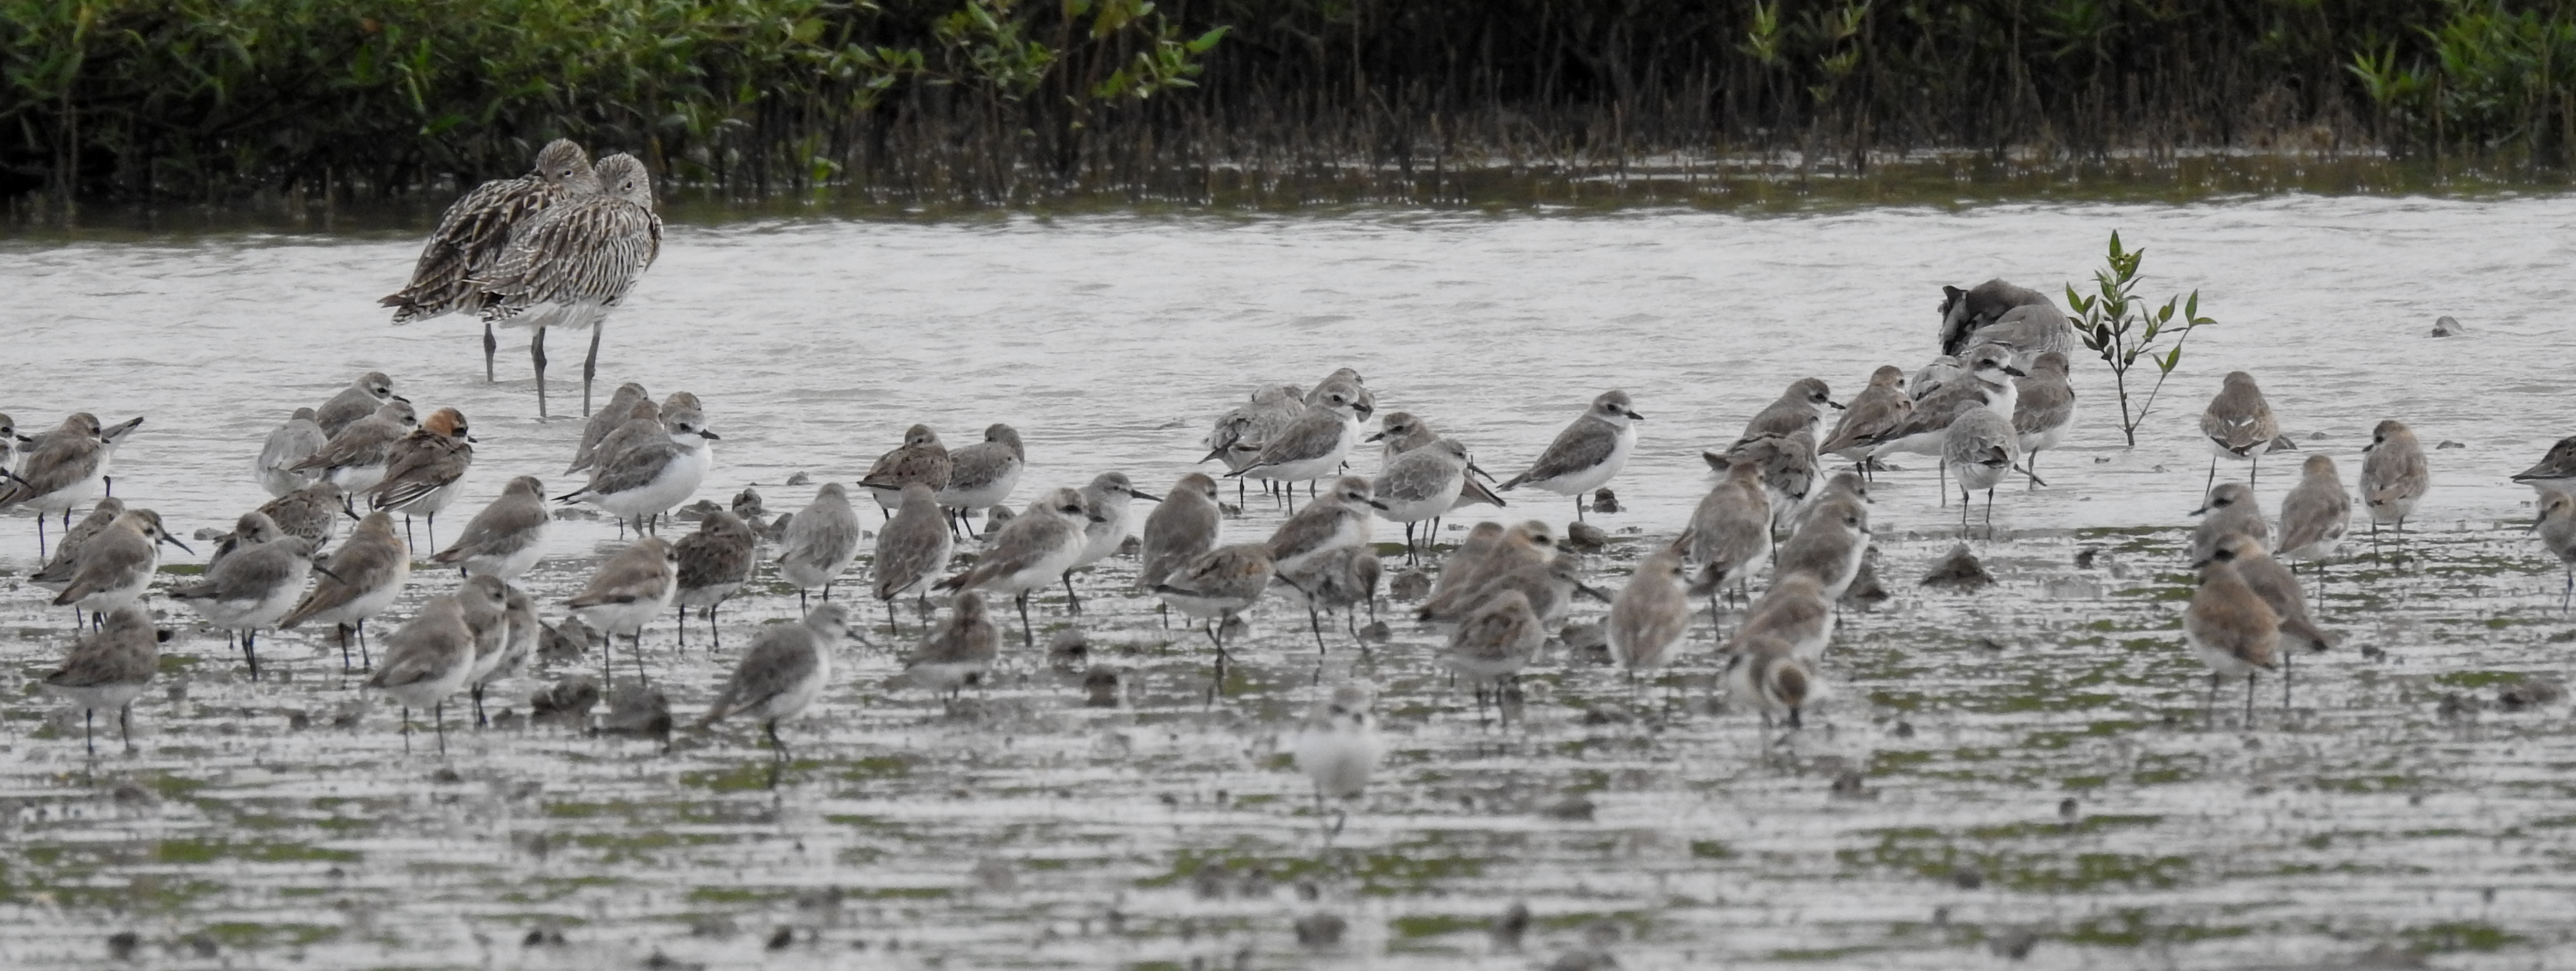 Lesser Sand plovers with other waders